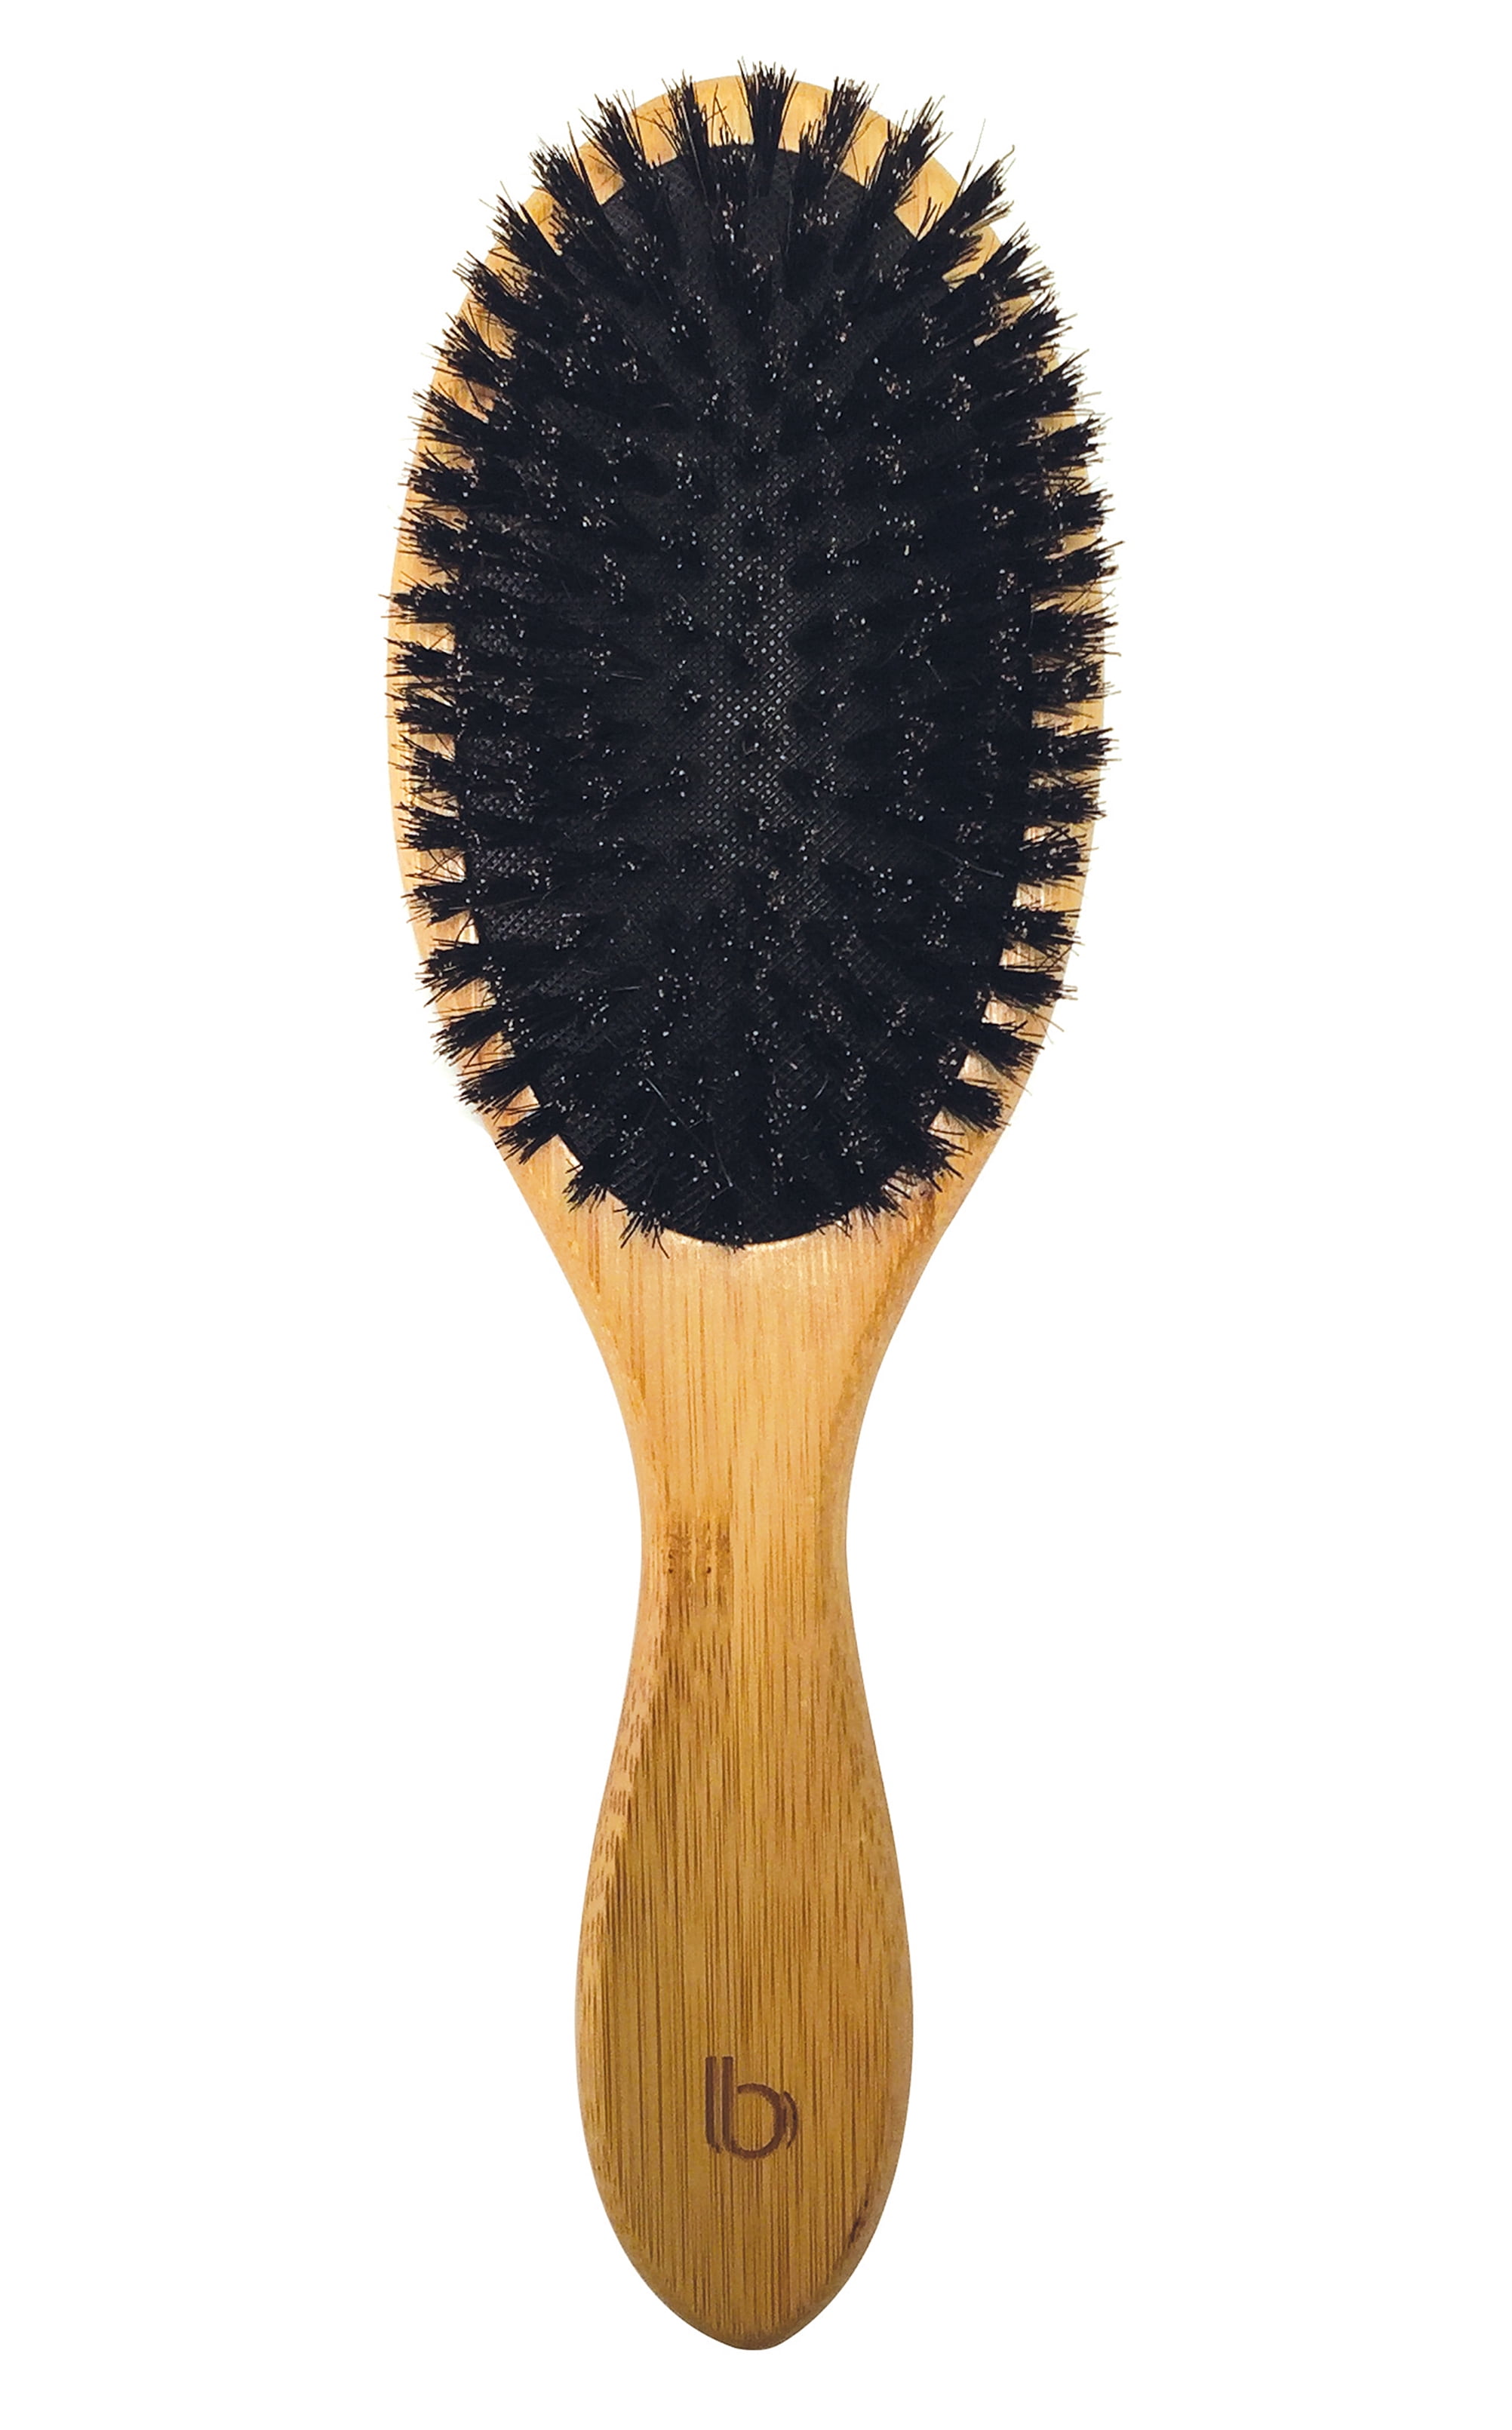 Large Oval Paddle Brush Styling Brush by Better Beauty ...